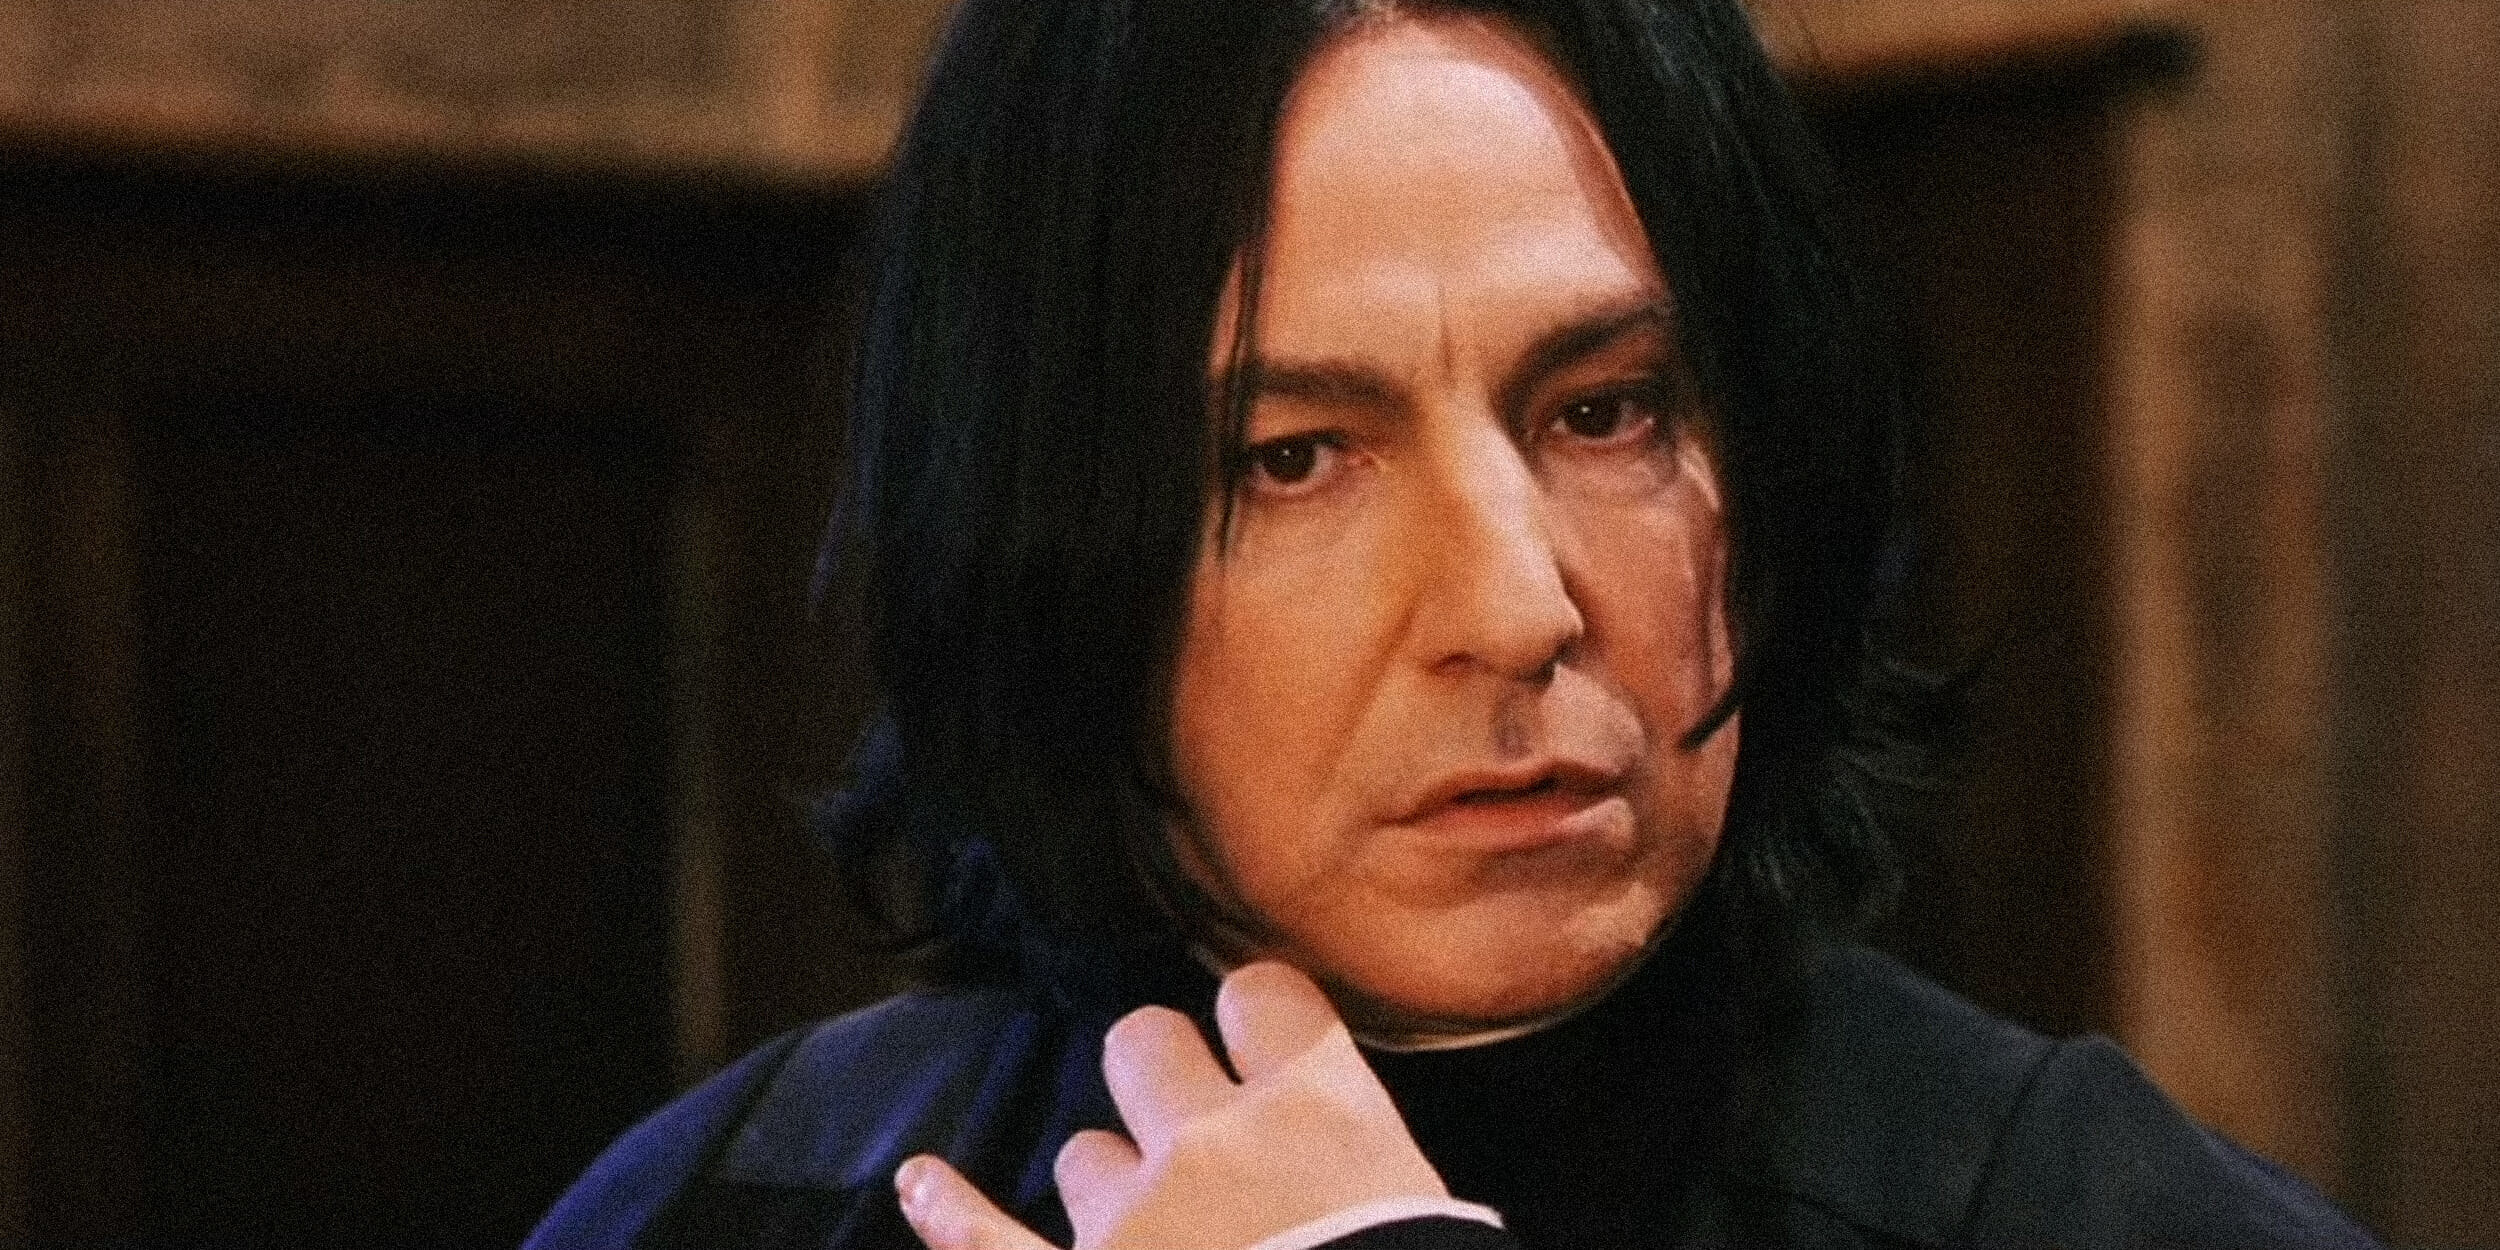 snape looking puzzled